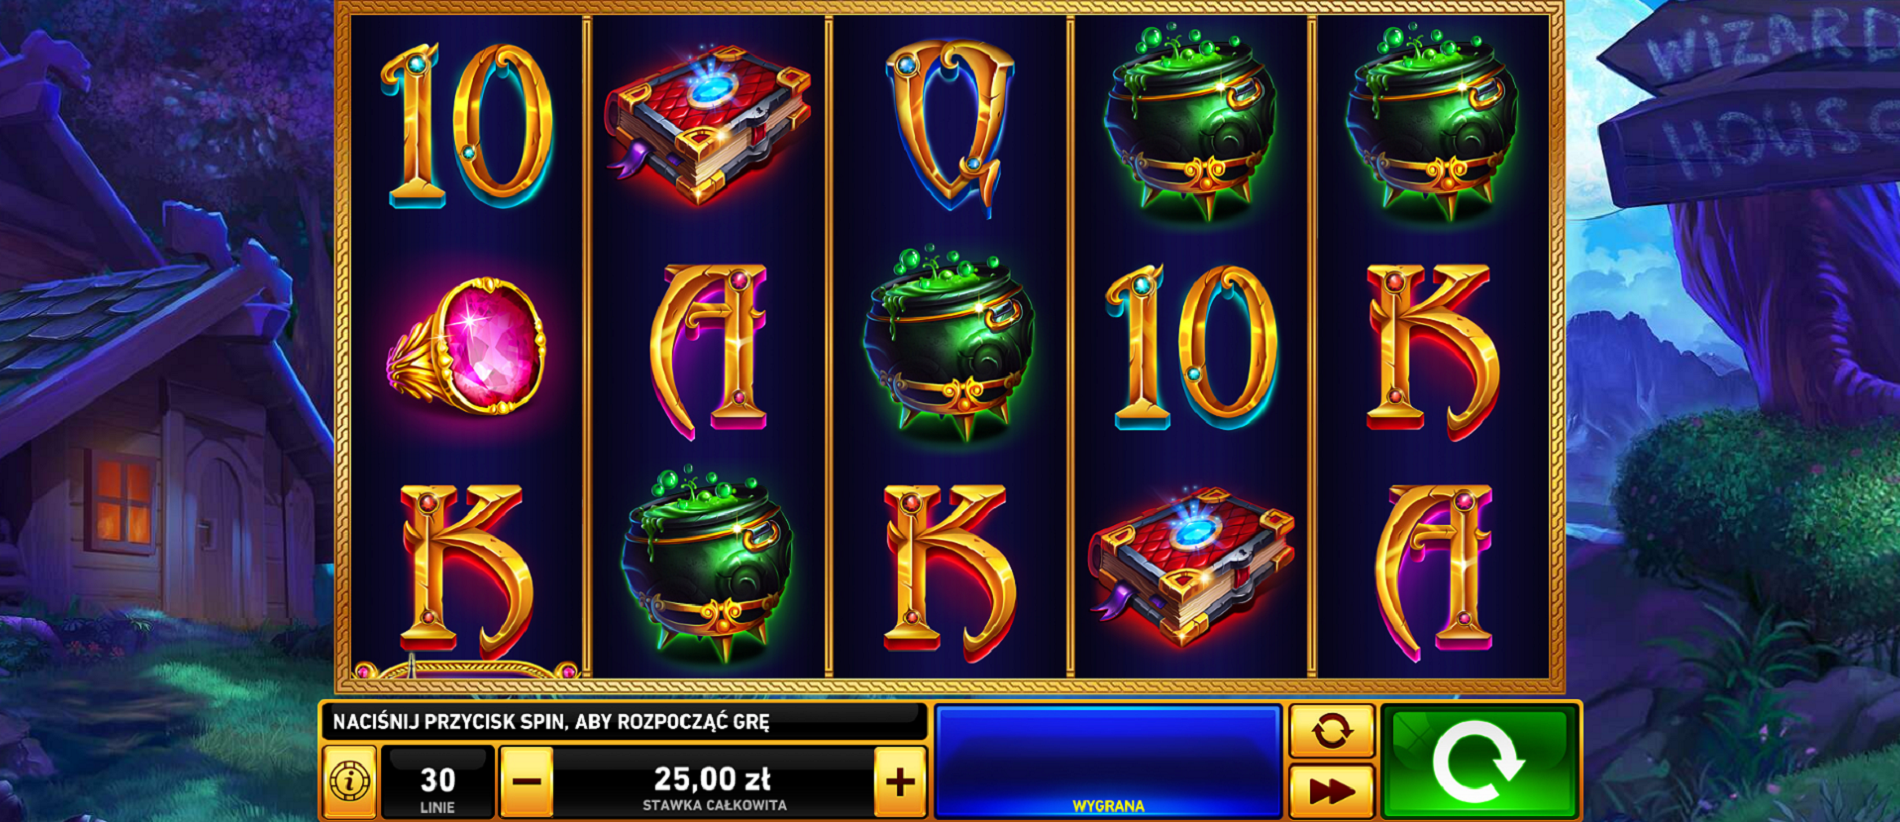 Blue Wizard - opis gry | Total Casino